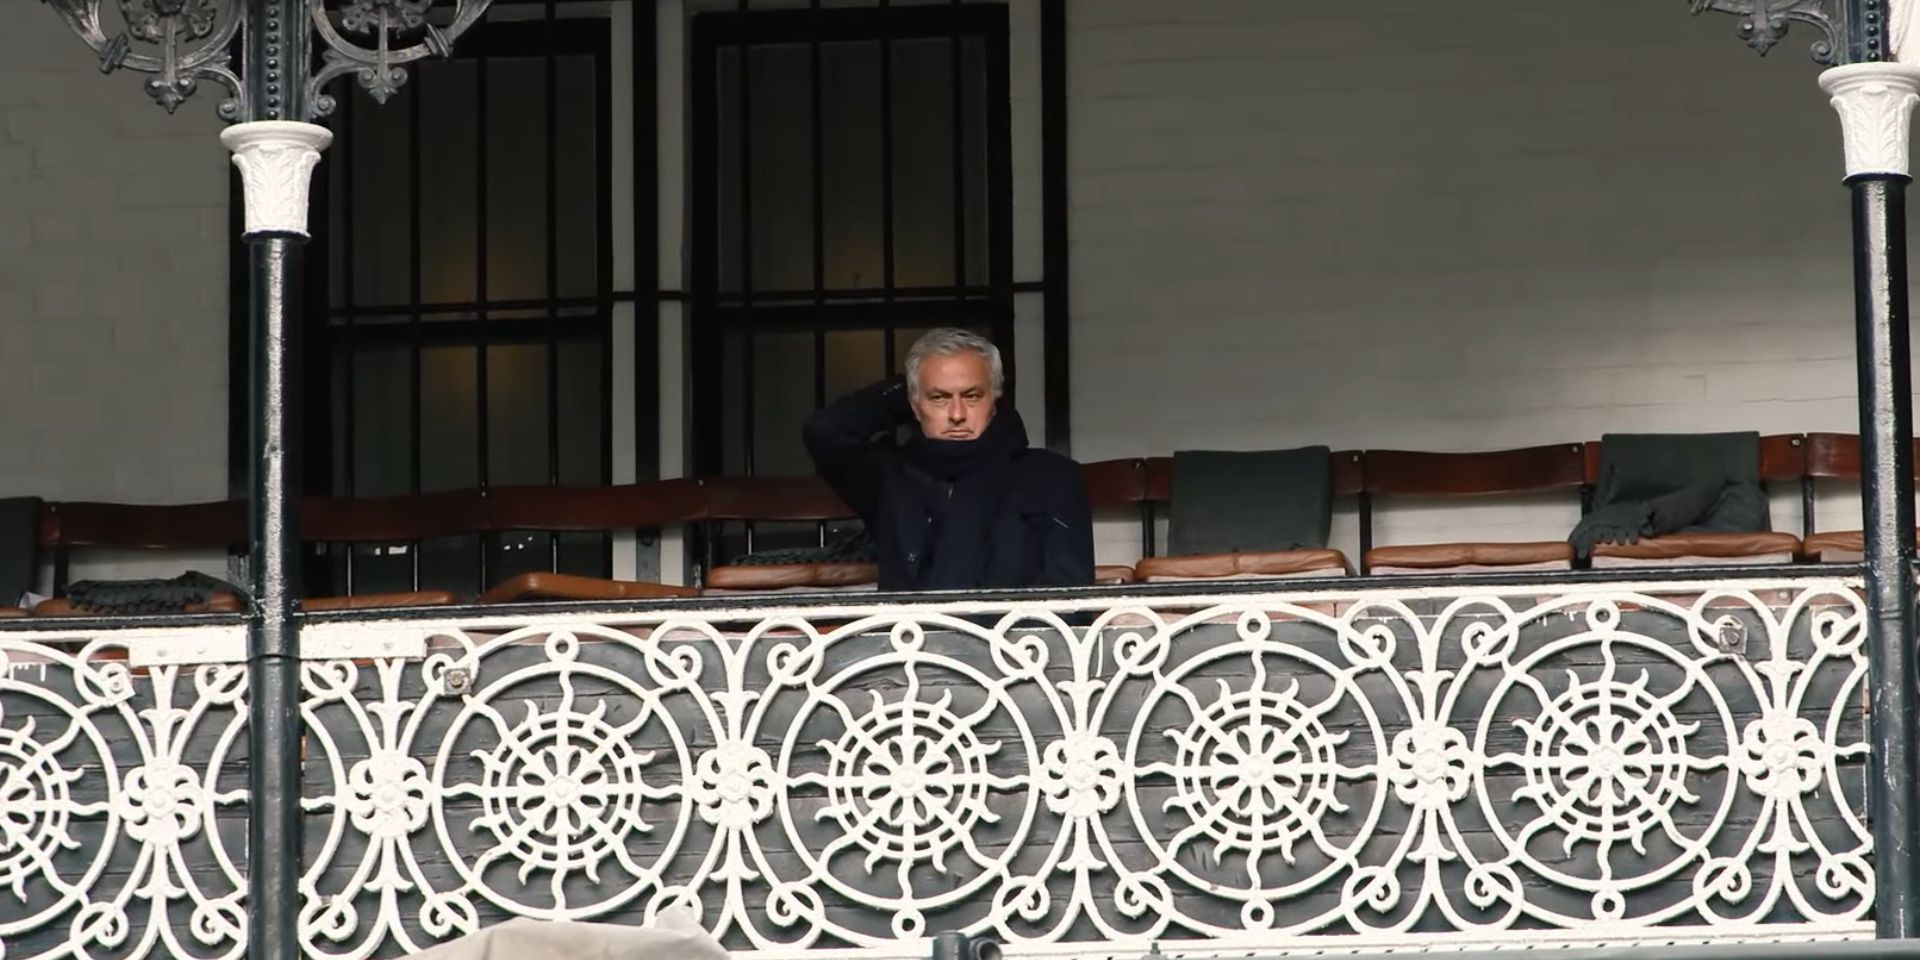 (Video) Liverpool FC release footage of Mourinho spectating Fulham game